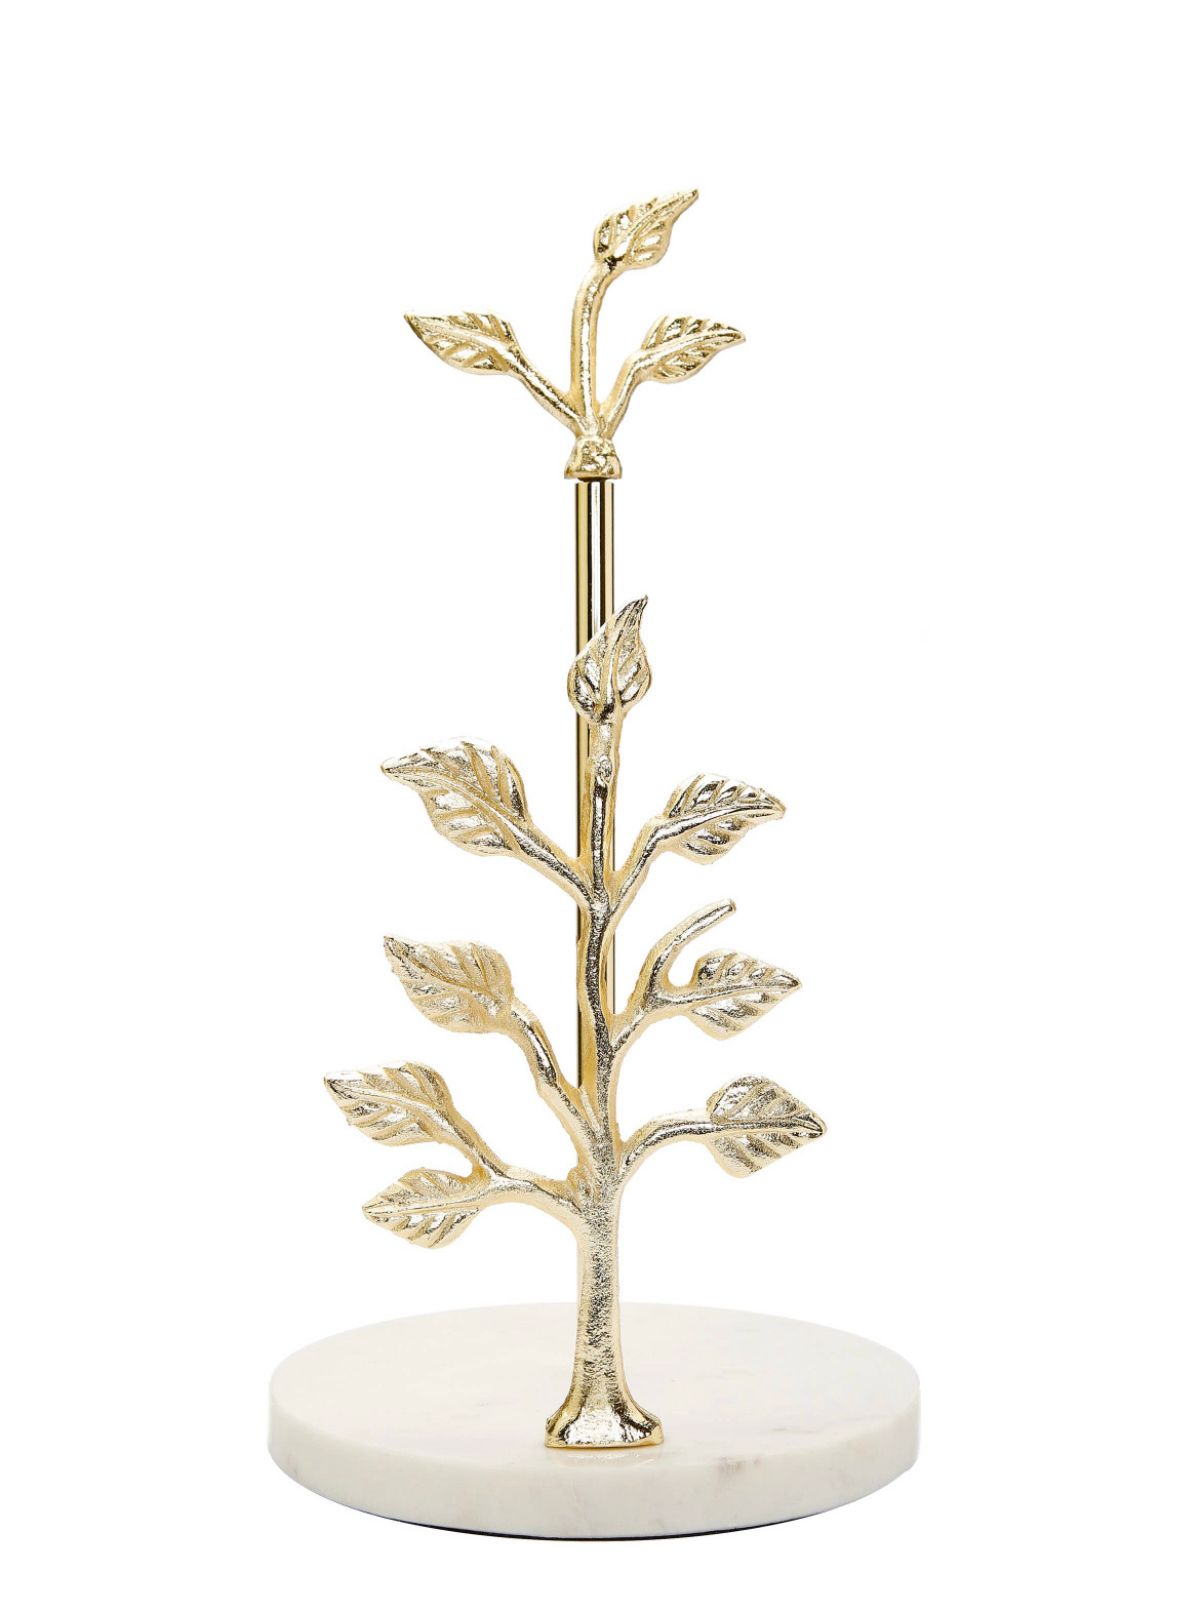 14.5H Stainless Steel Paper Towel Holder with Gold Tree and Marble Base. Sold by KYA Home Decor